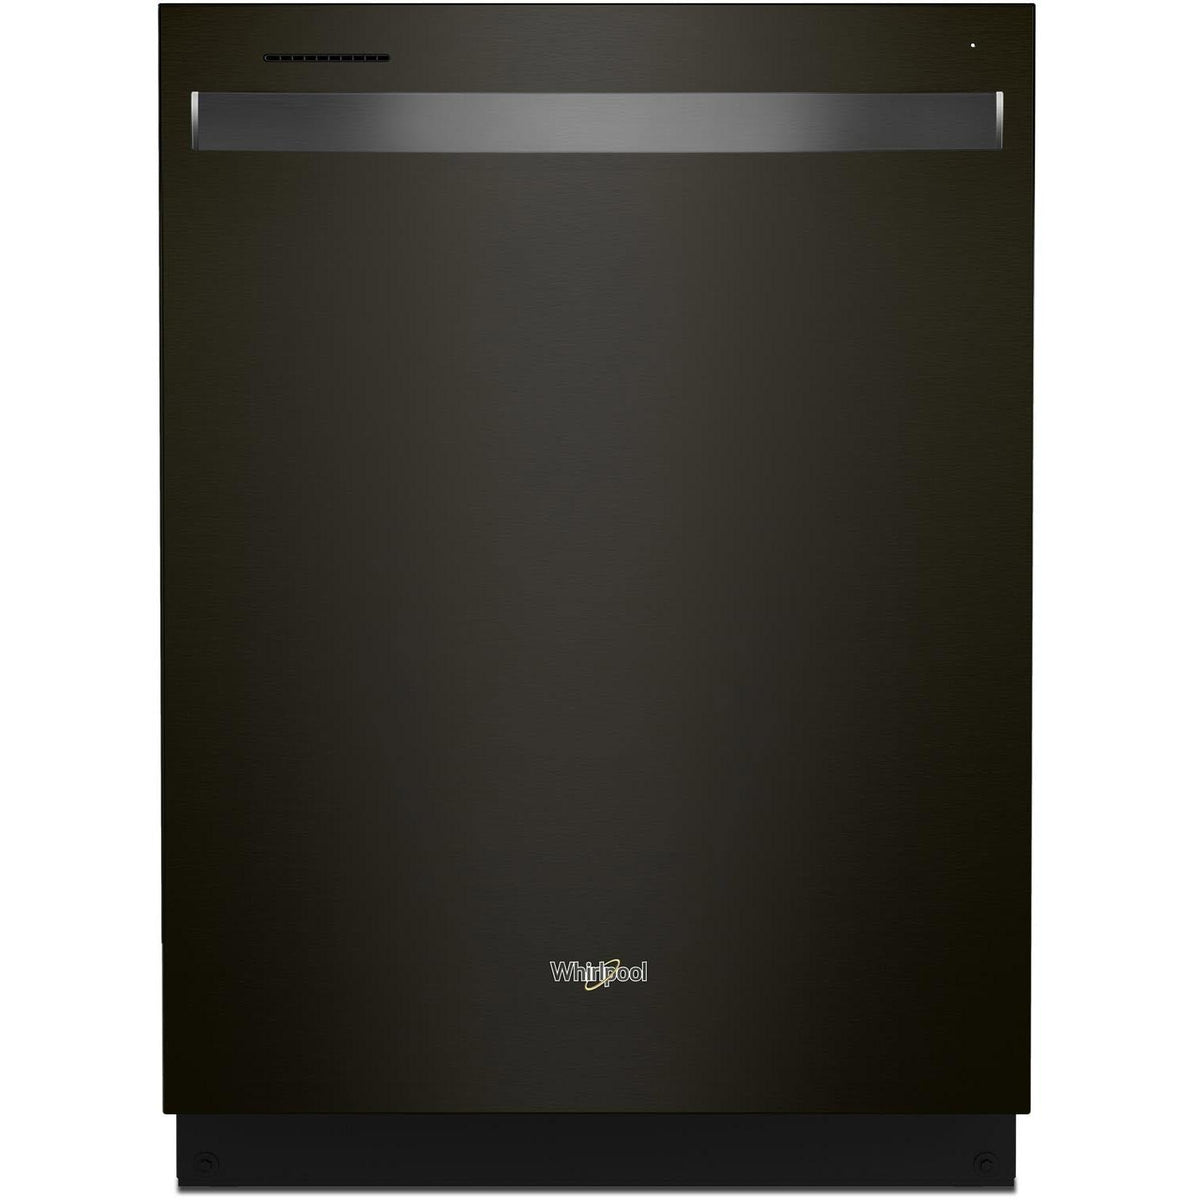 Whirlpool 24-inch Built-in Dishwasher with Sani Rinse Option WDT750SAKV IMAGE 1